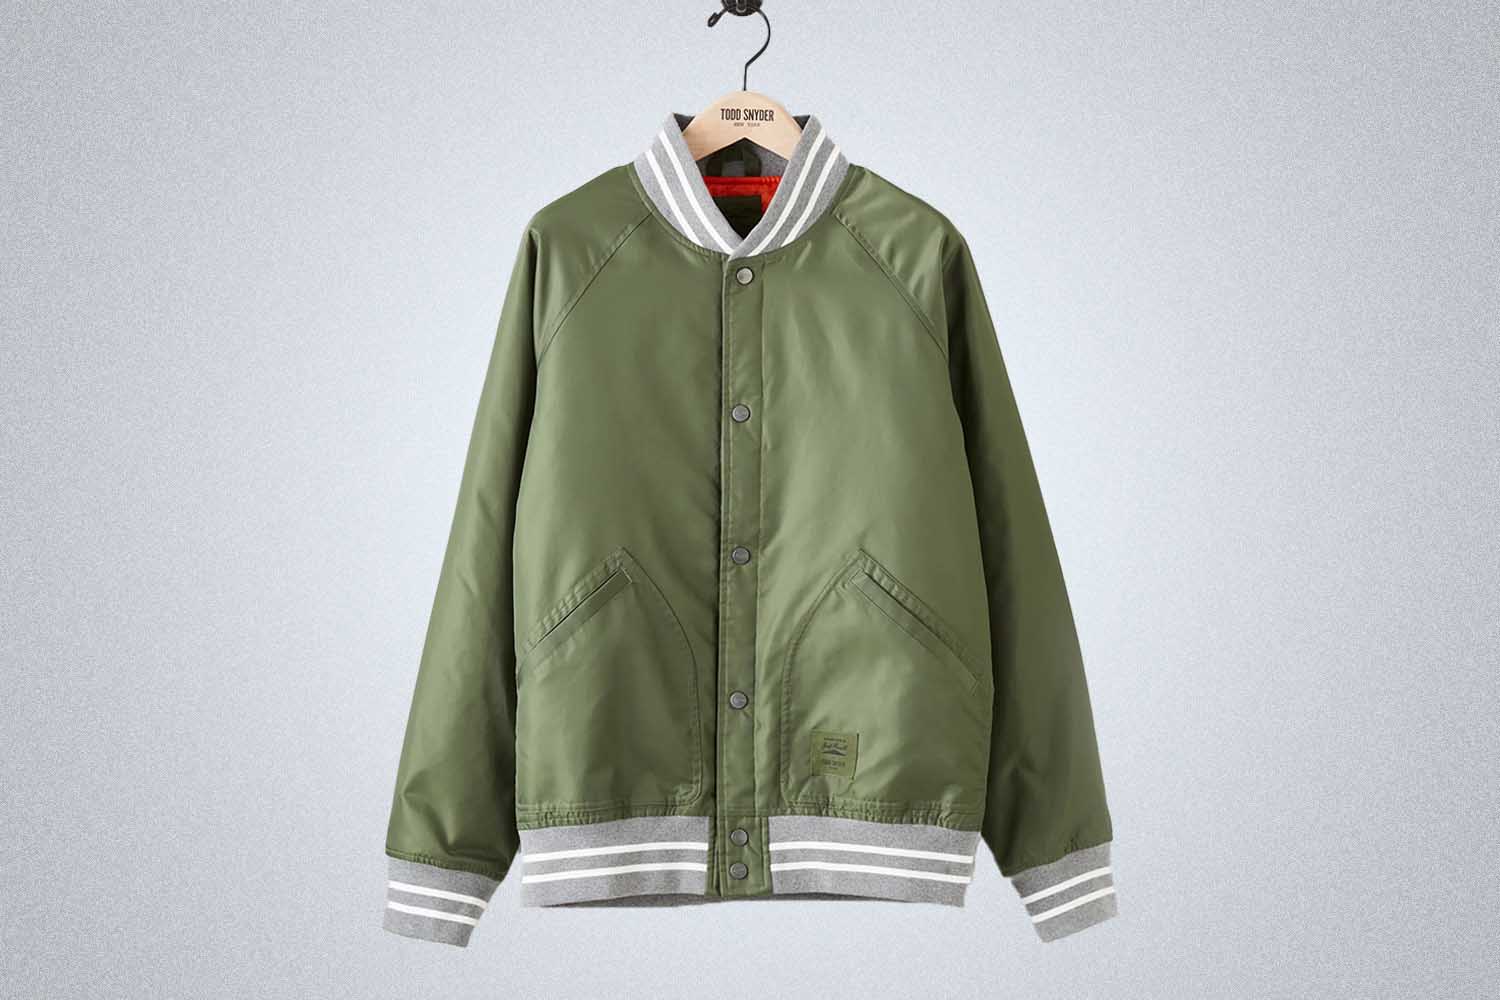 a green bomber jacket from Todd Snyder on a grey background